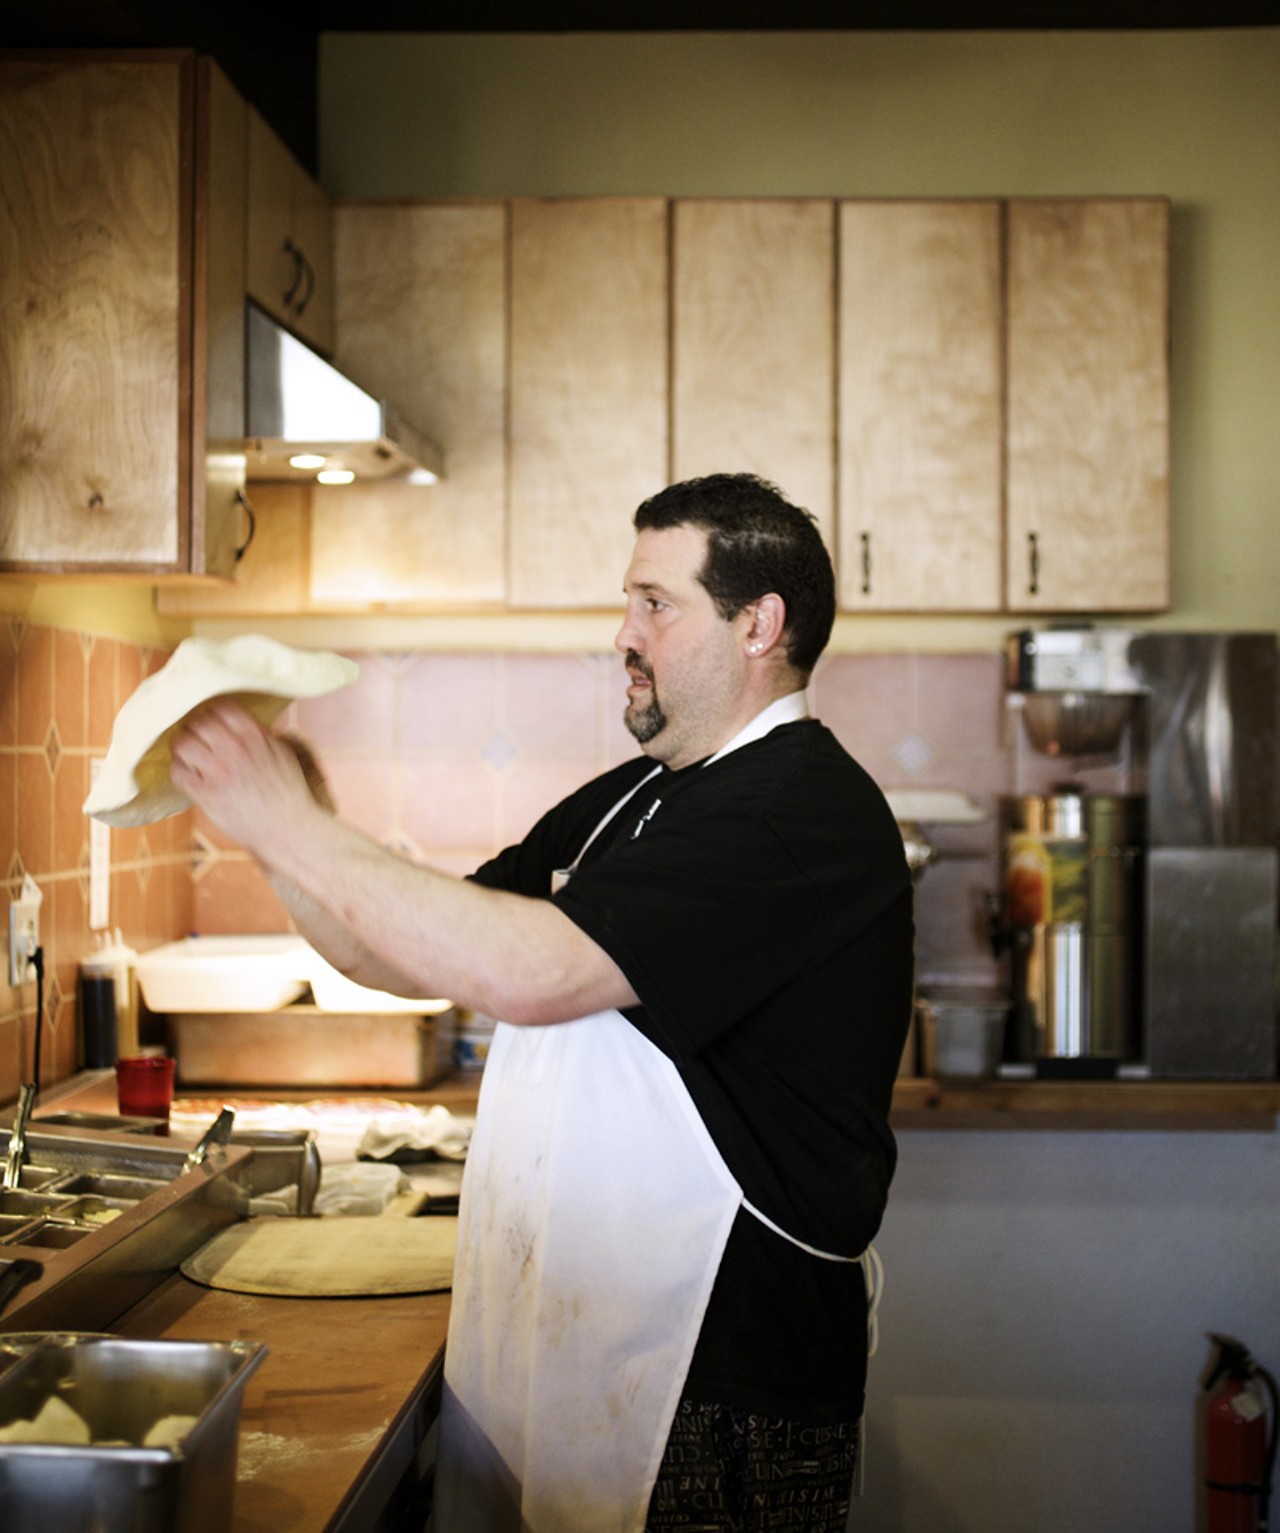 Sam Racanelli is the pizza man behind Pizzeria Tivoli. Sam, here, is stretching the pizza dough.